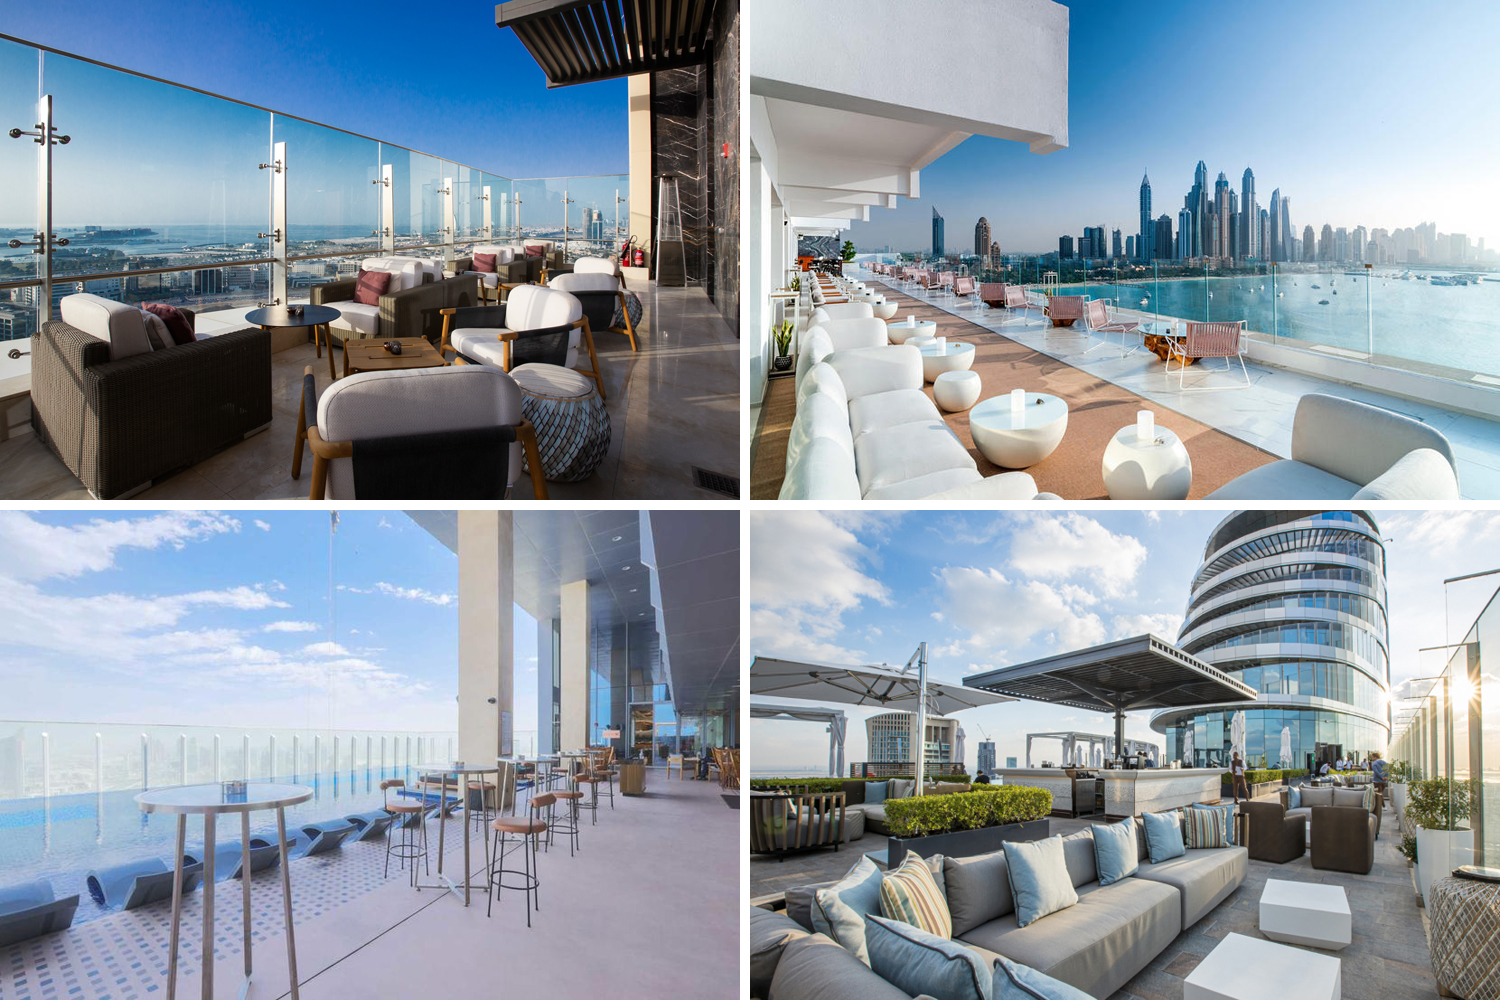 11 stunning rooftop bars in Dubai to try | Time Out Dubai